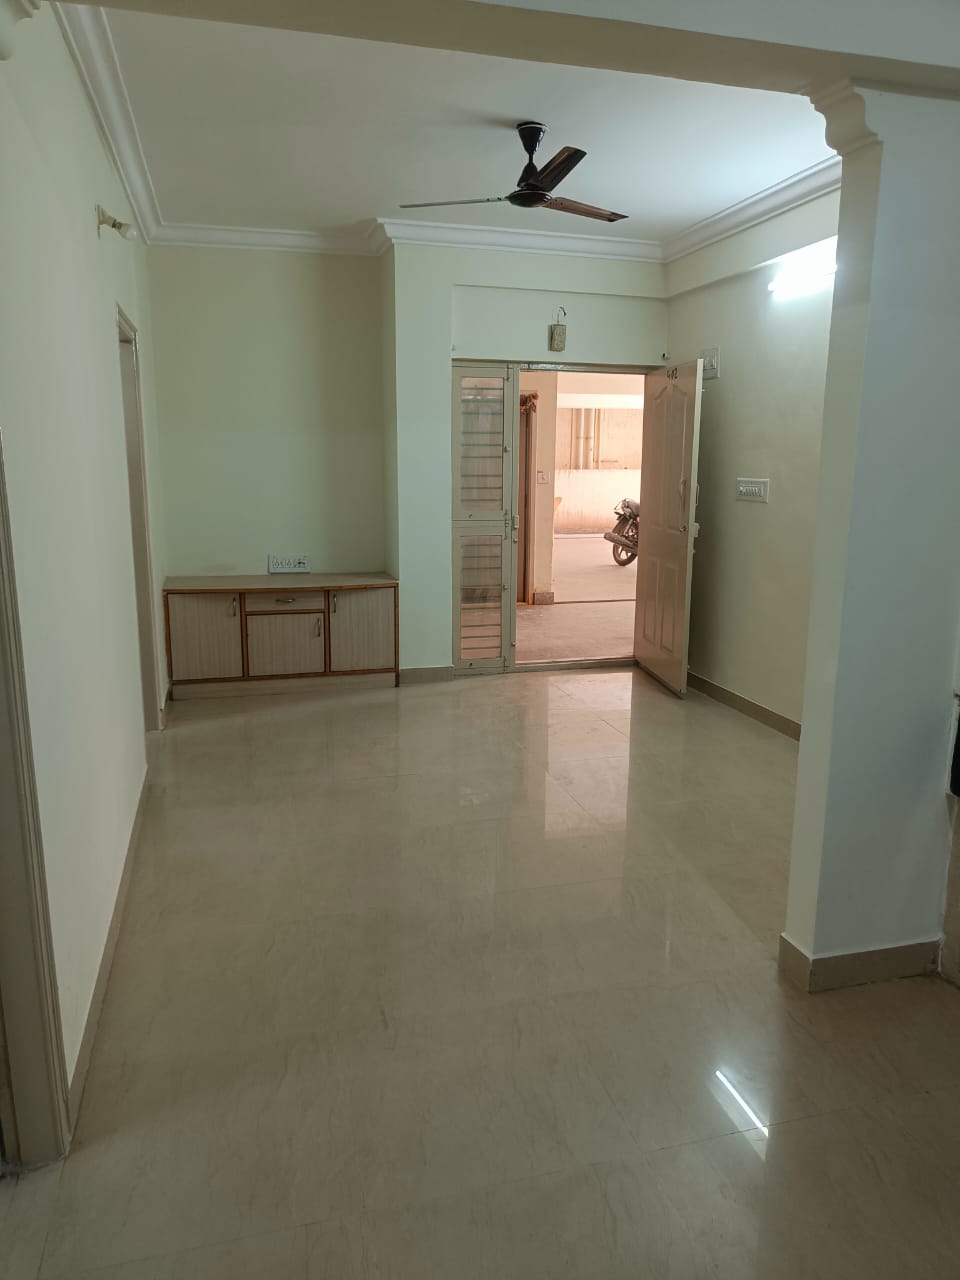 1 BHK Residential Apartment for Lease Only at JAML2 - 4971 -12lakh in Doddenahalli